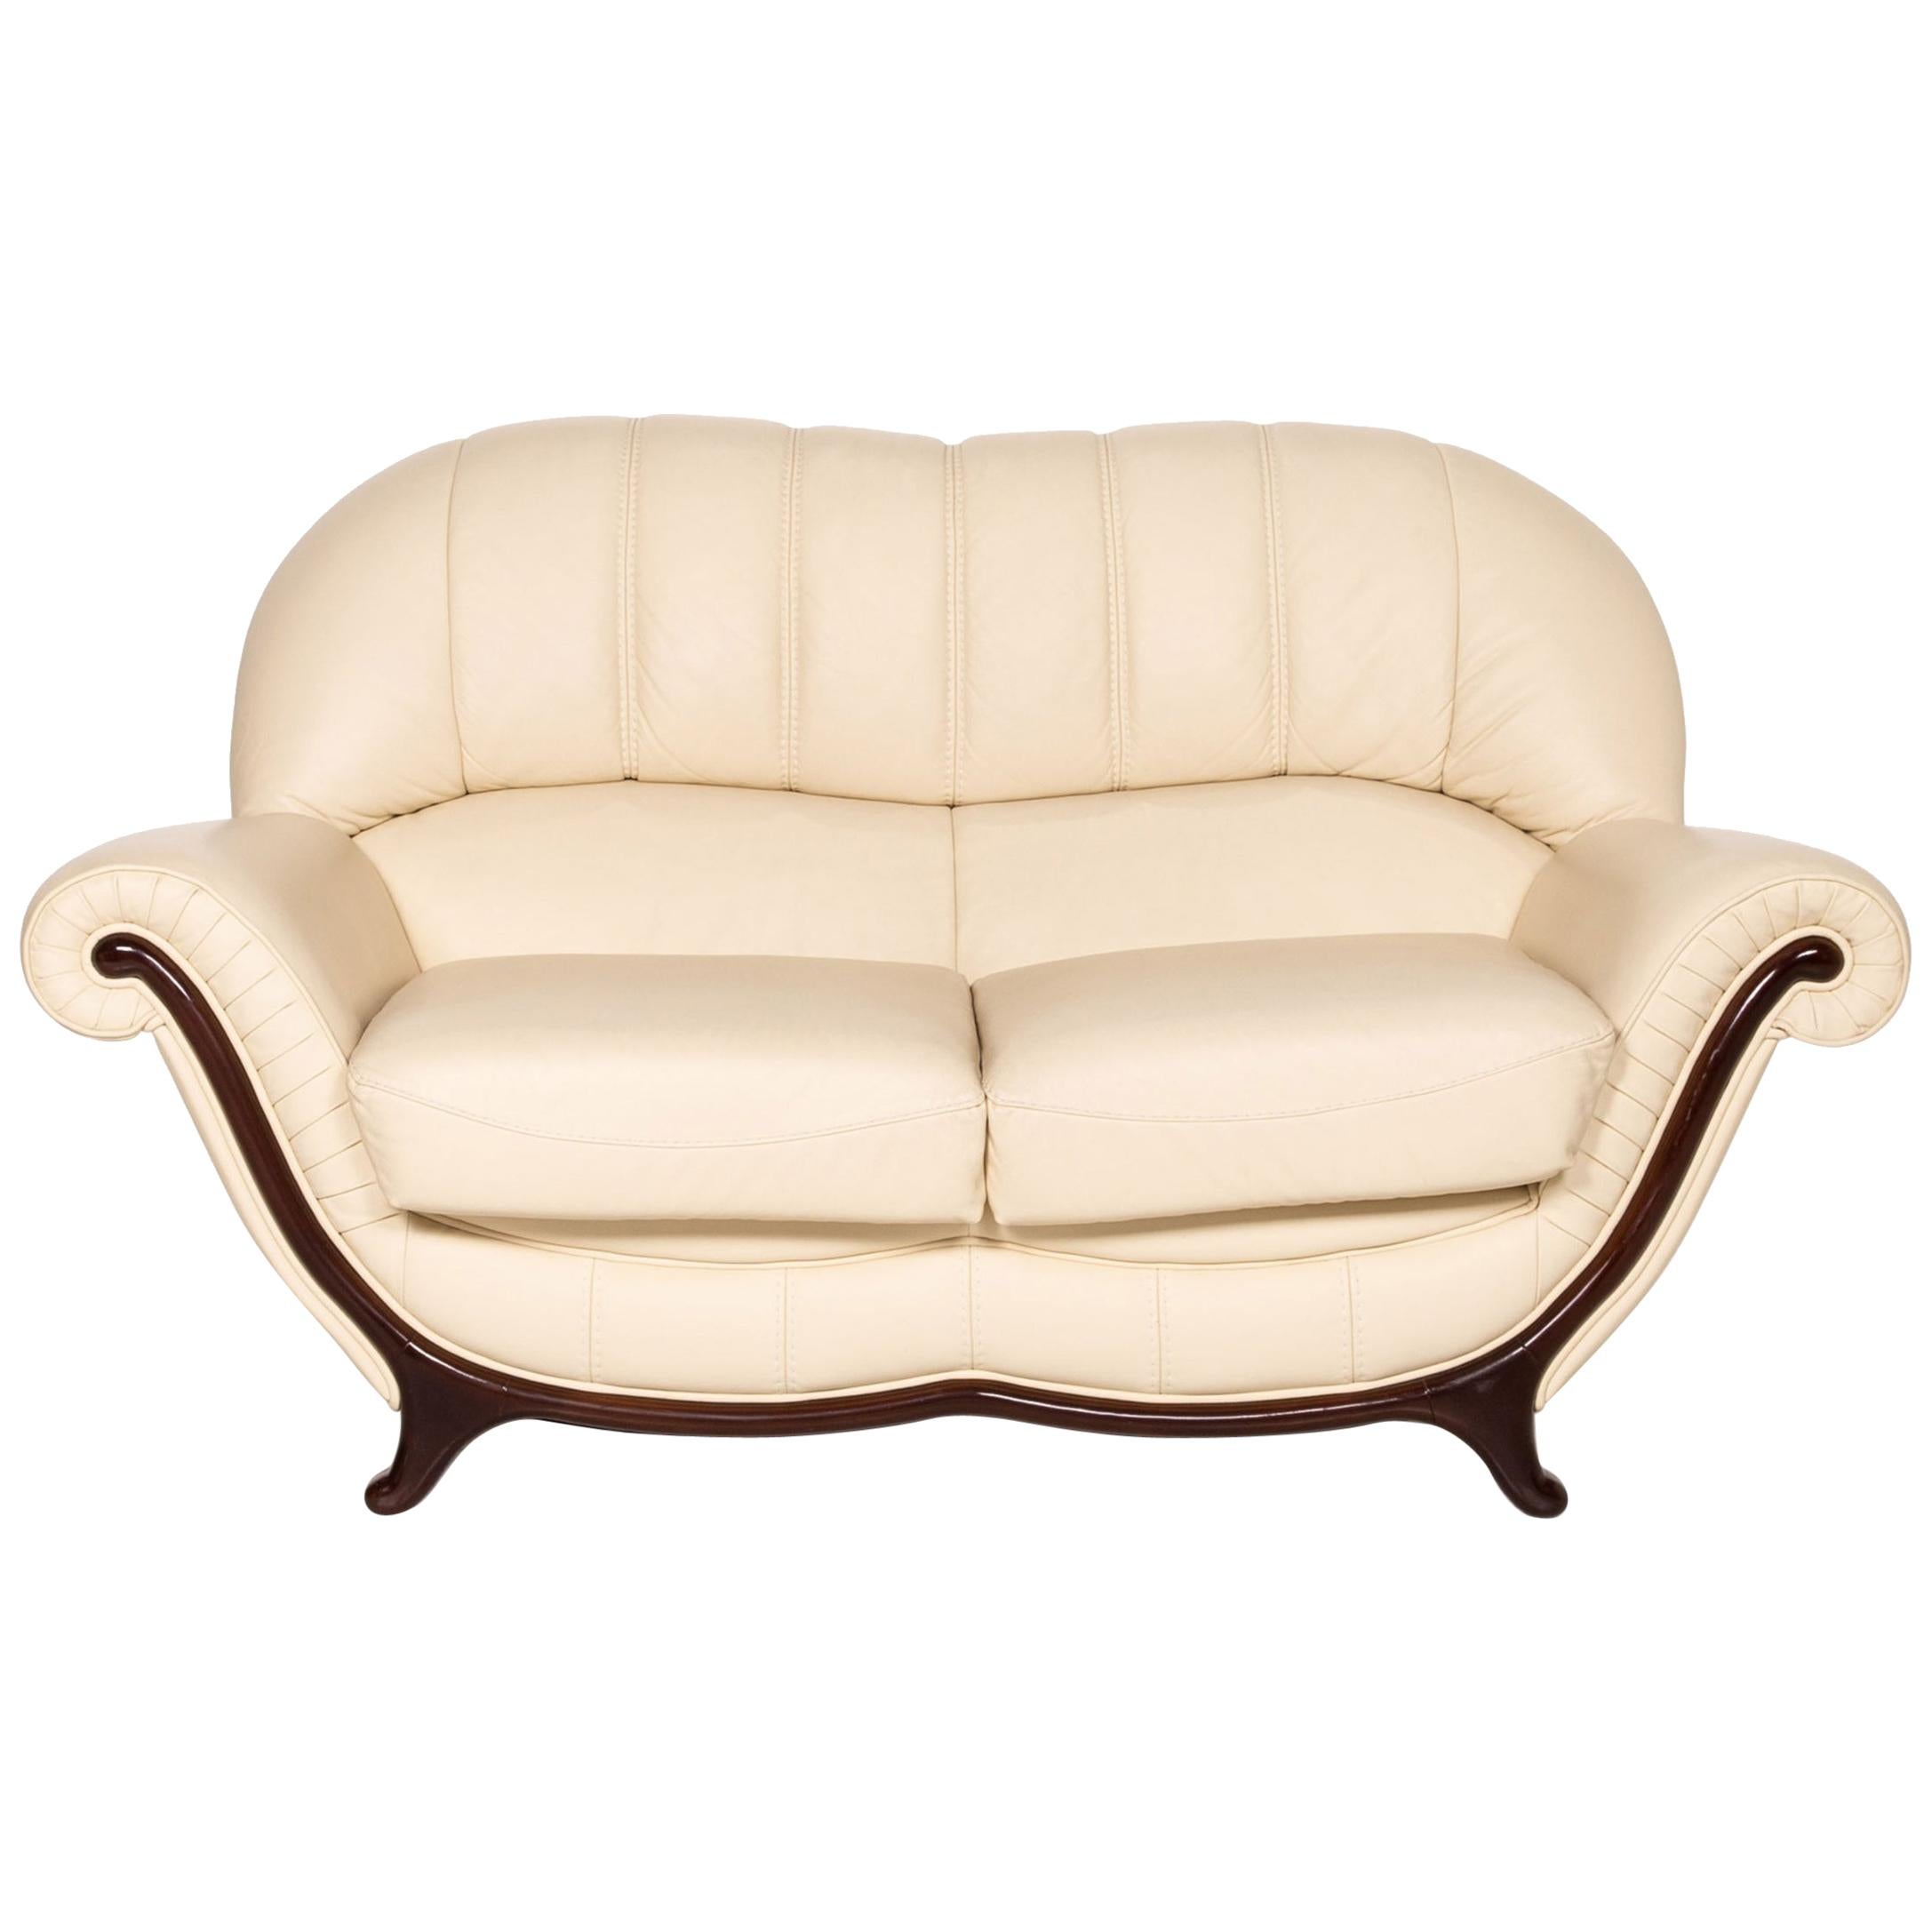 Nieri Leather Wood Sofa Cream Two-Seater Couch For Sale